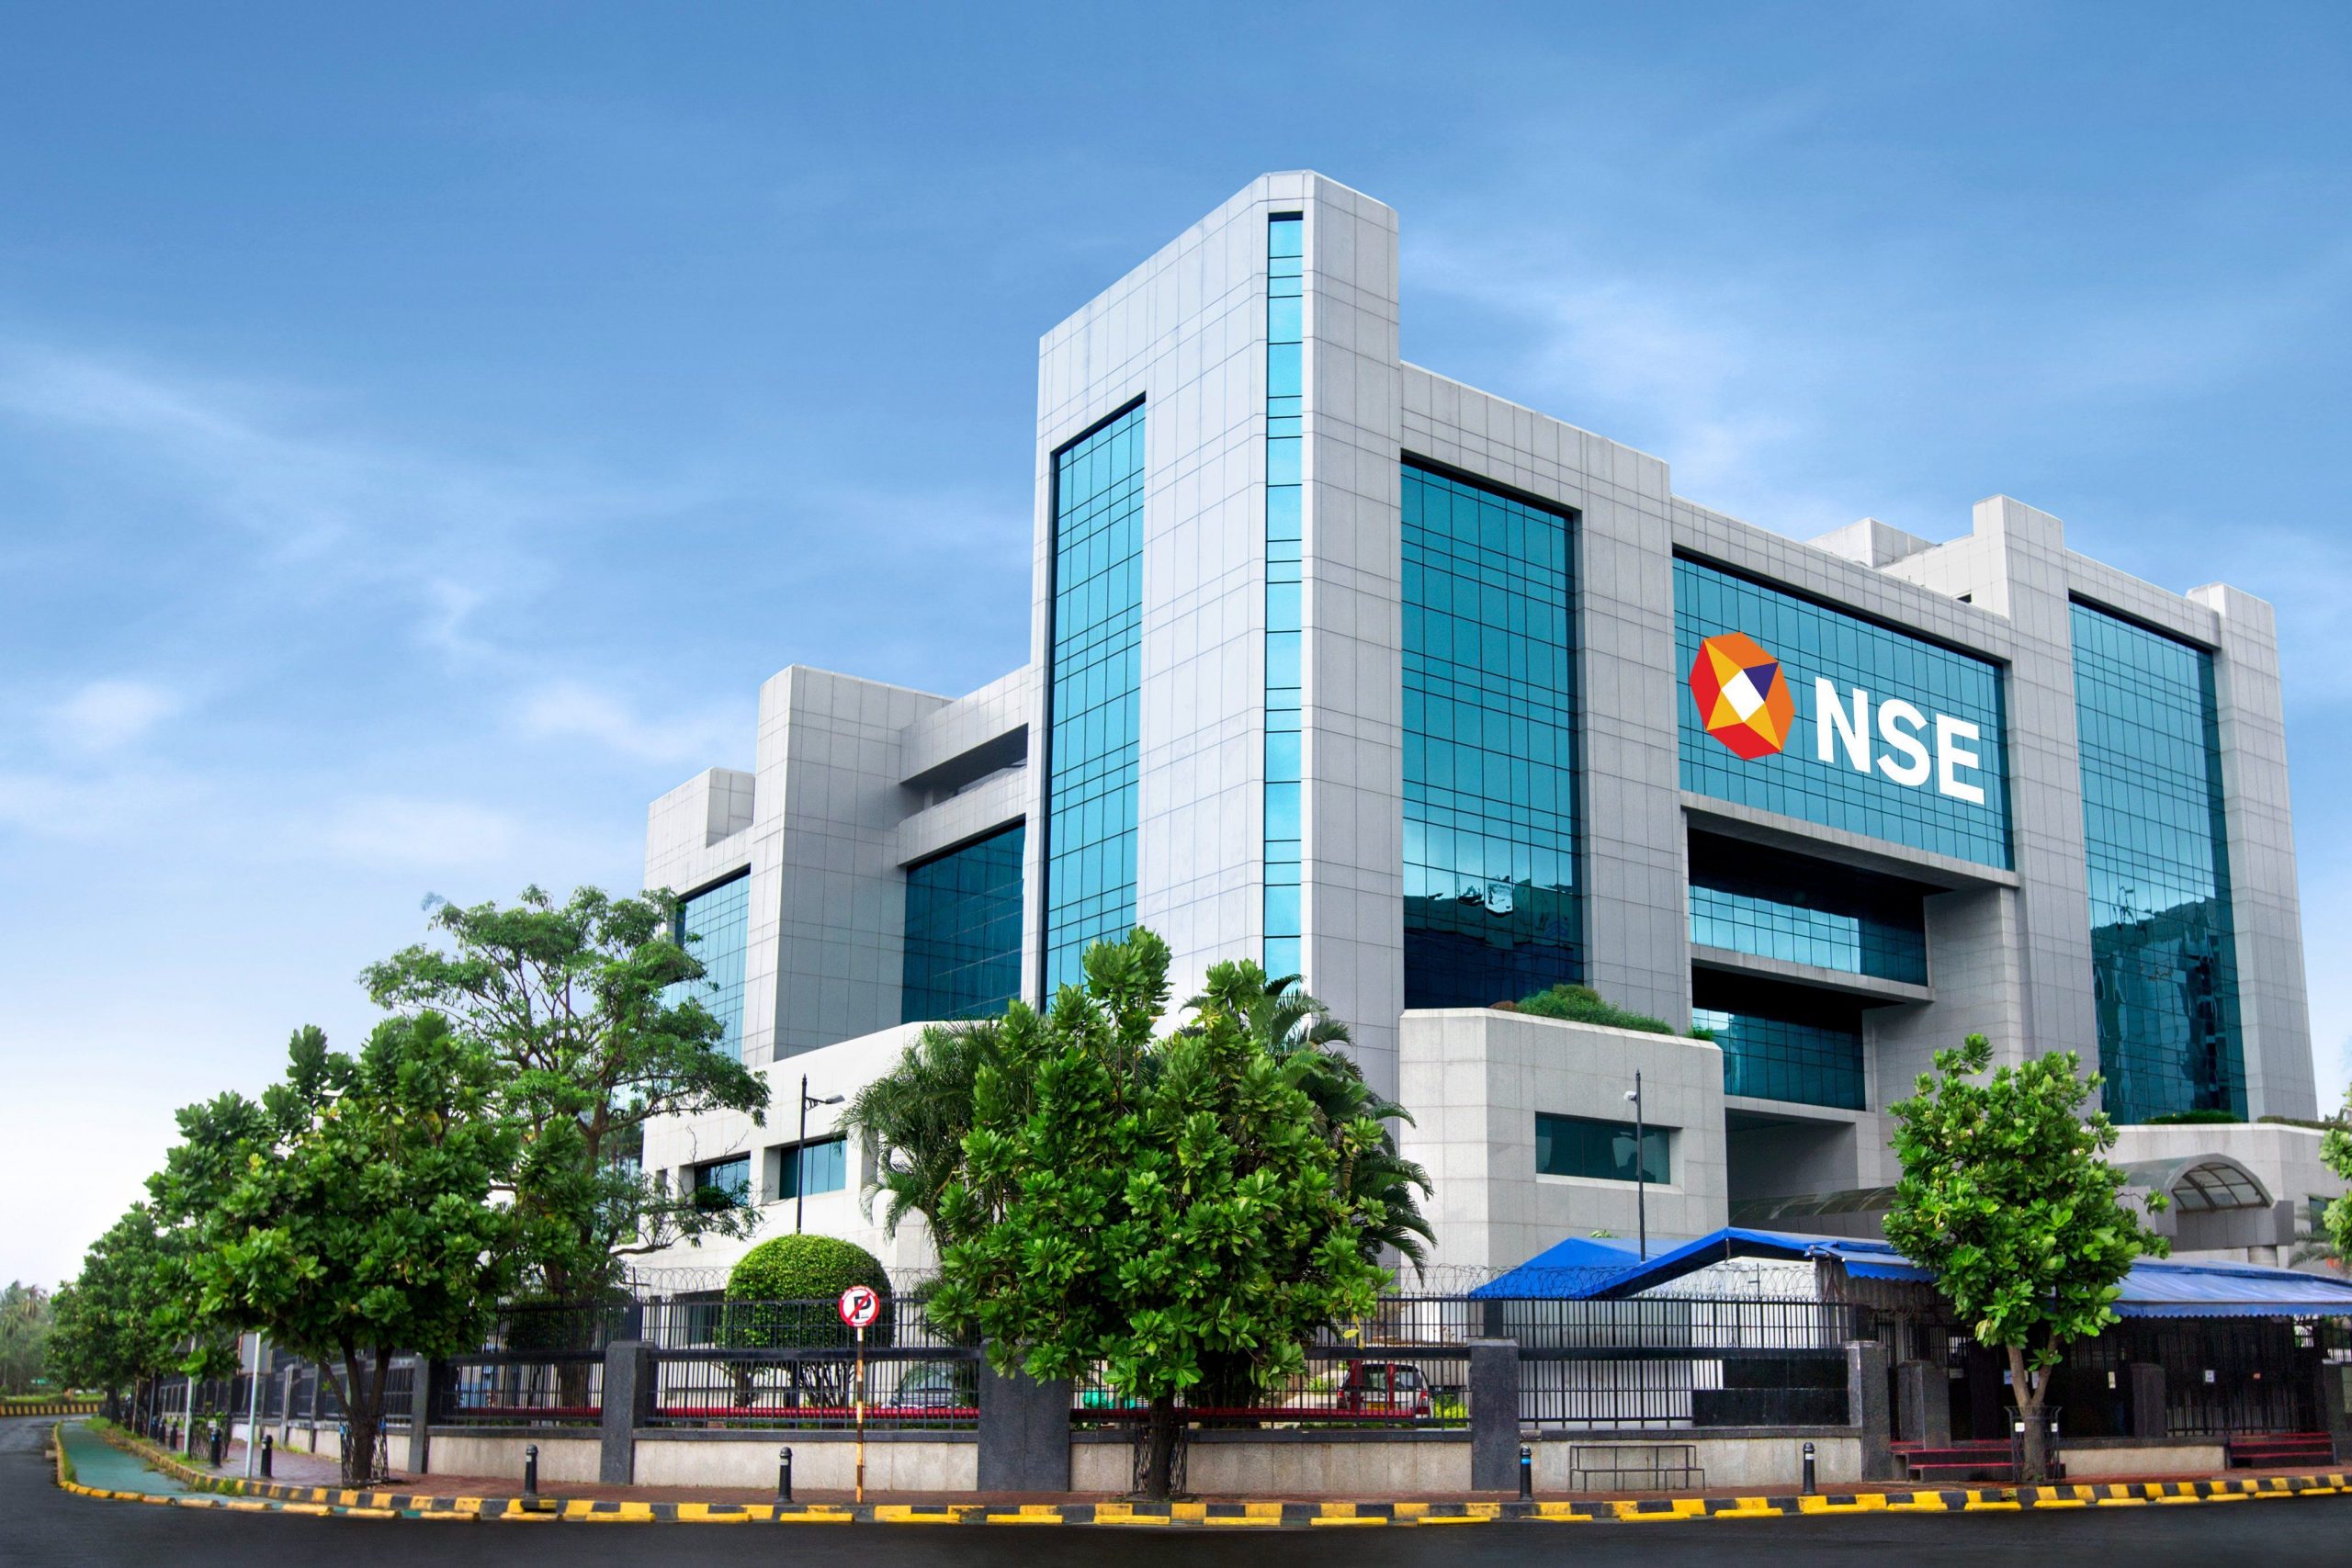 NSE F&O Ban: Balrampur Chini and others under ban on Wednesday, August 17, 2022